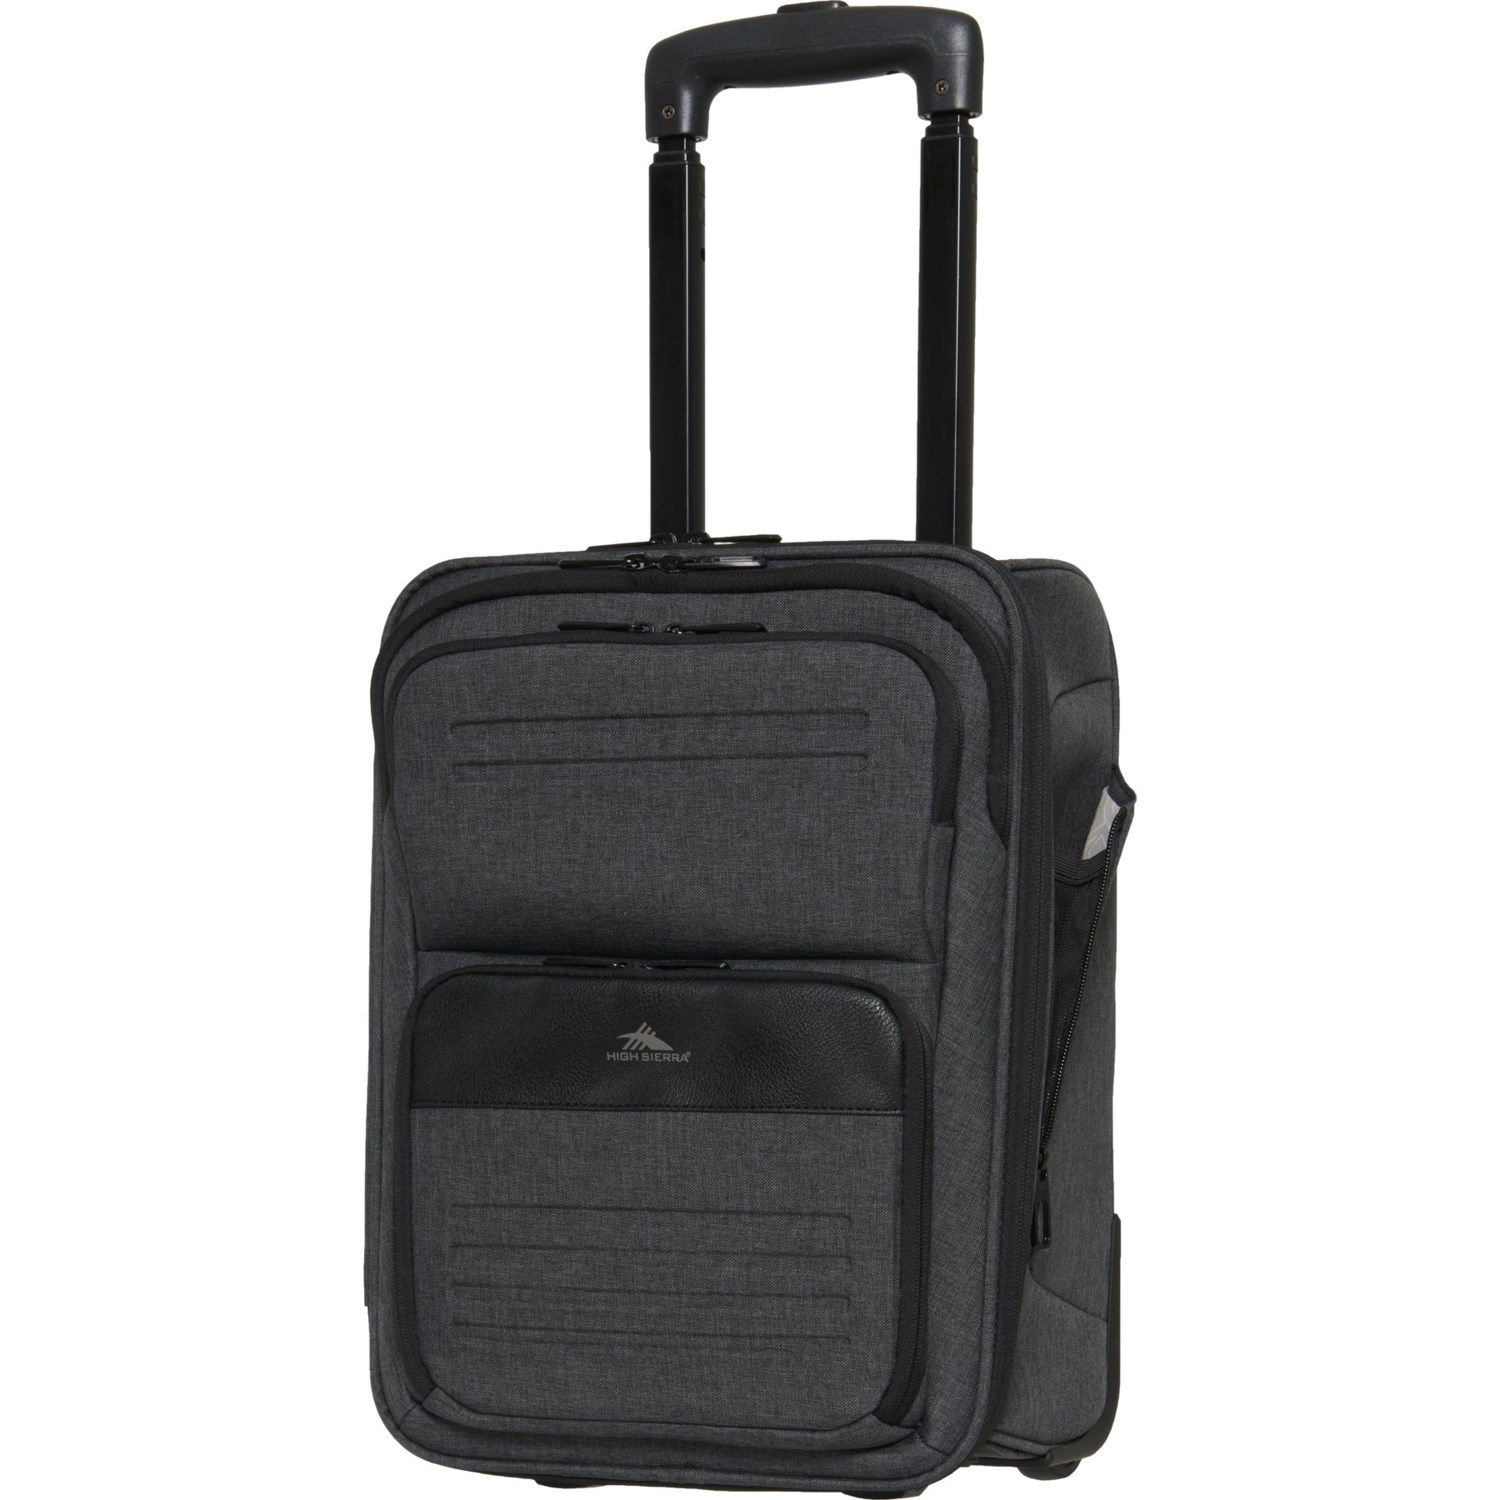 High Sierra 16.5” Endeavor 2.0 Underseater Carry-On Rolling Suitcase - Softside, Grey Heather